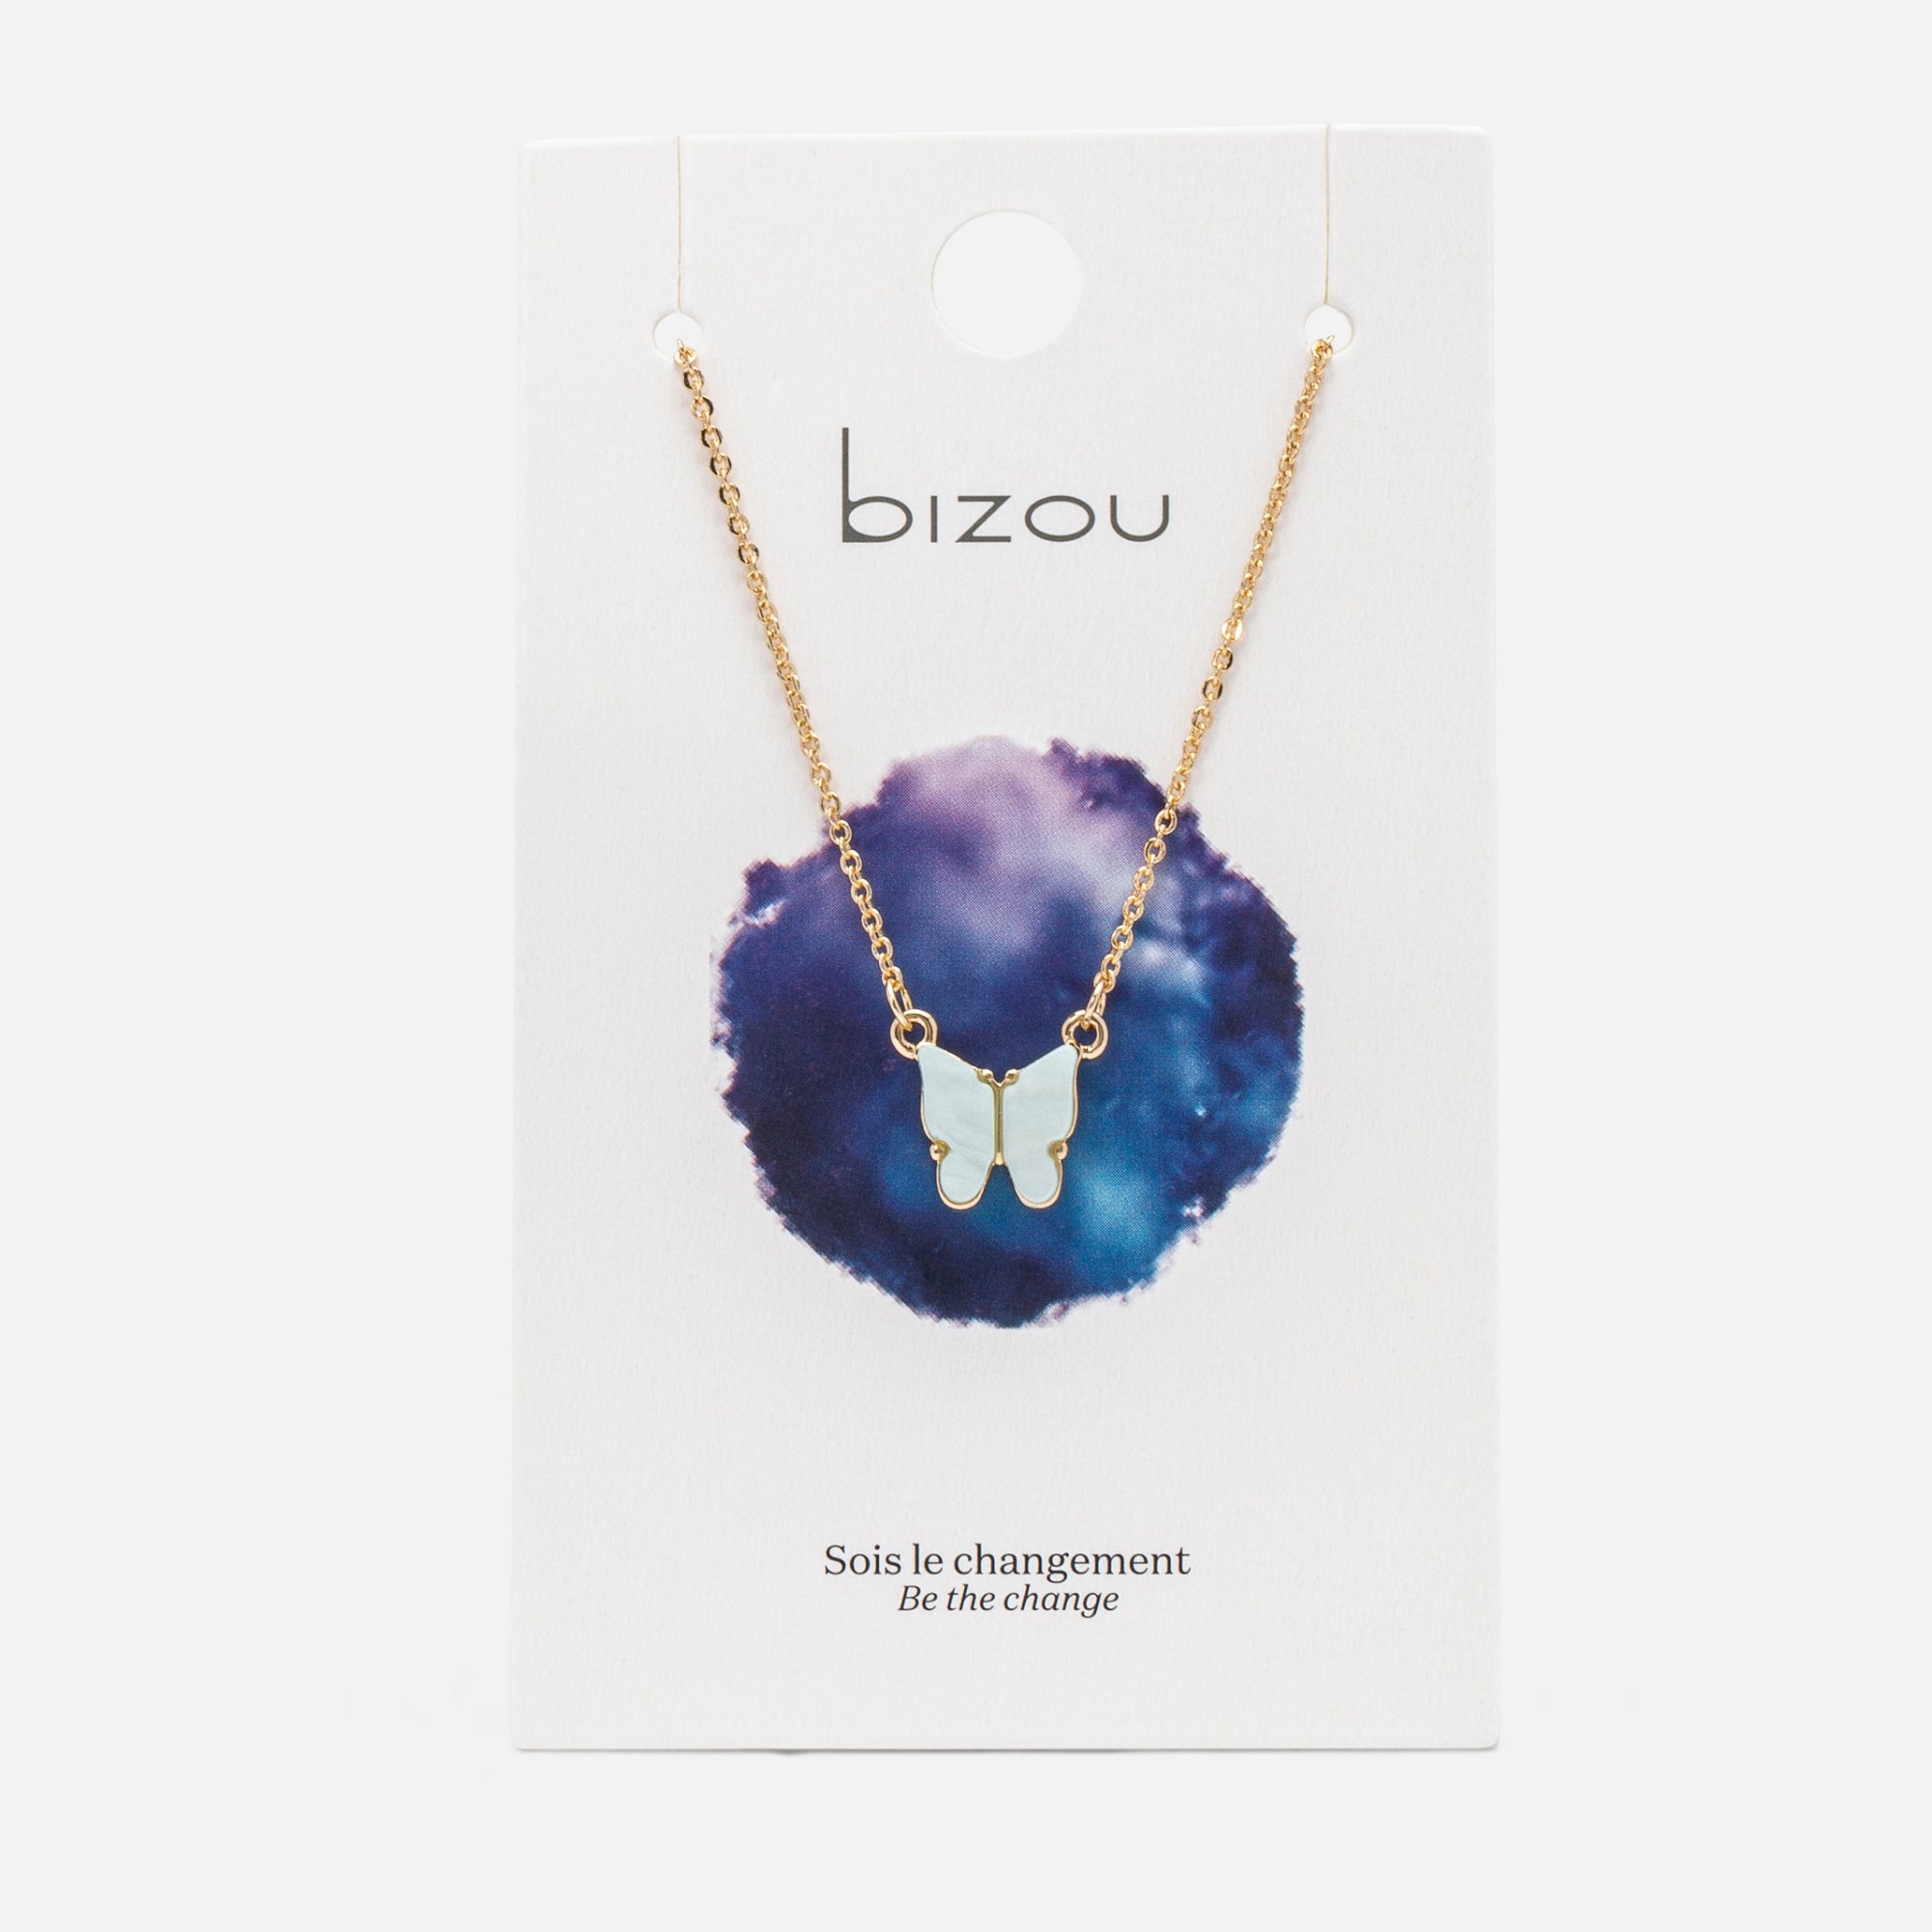 Golden necklace with blue butterfly charm